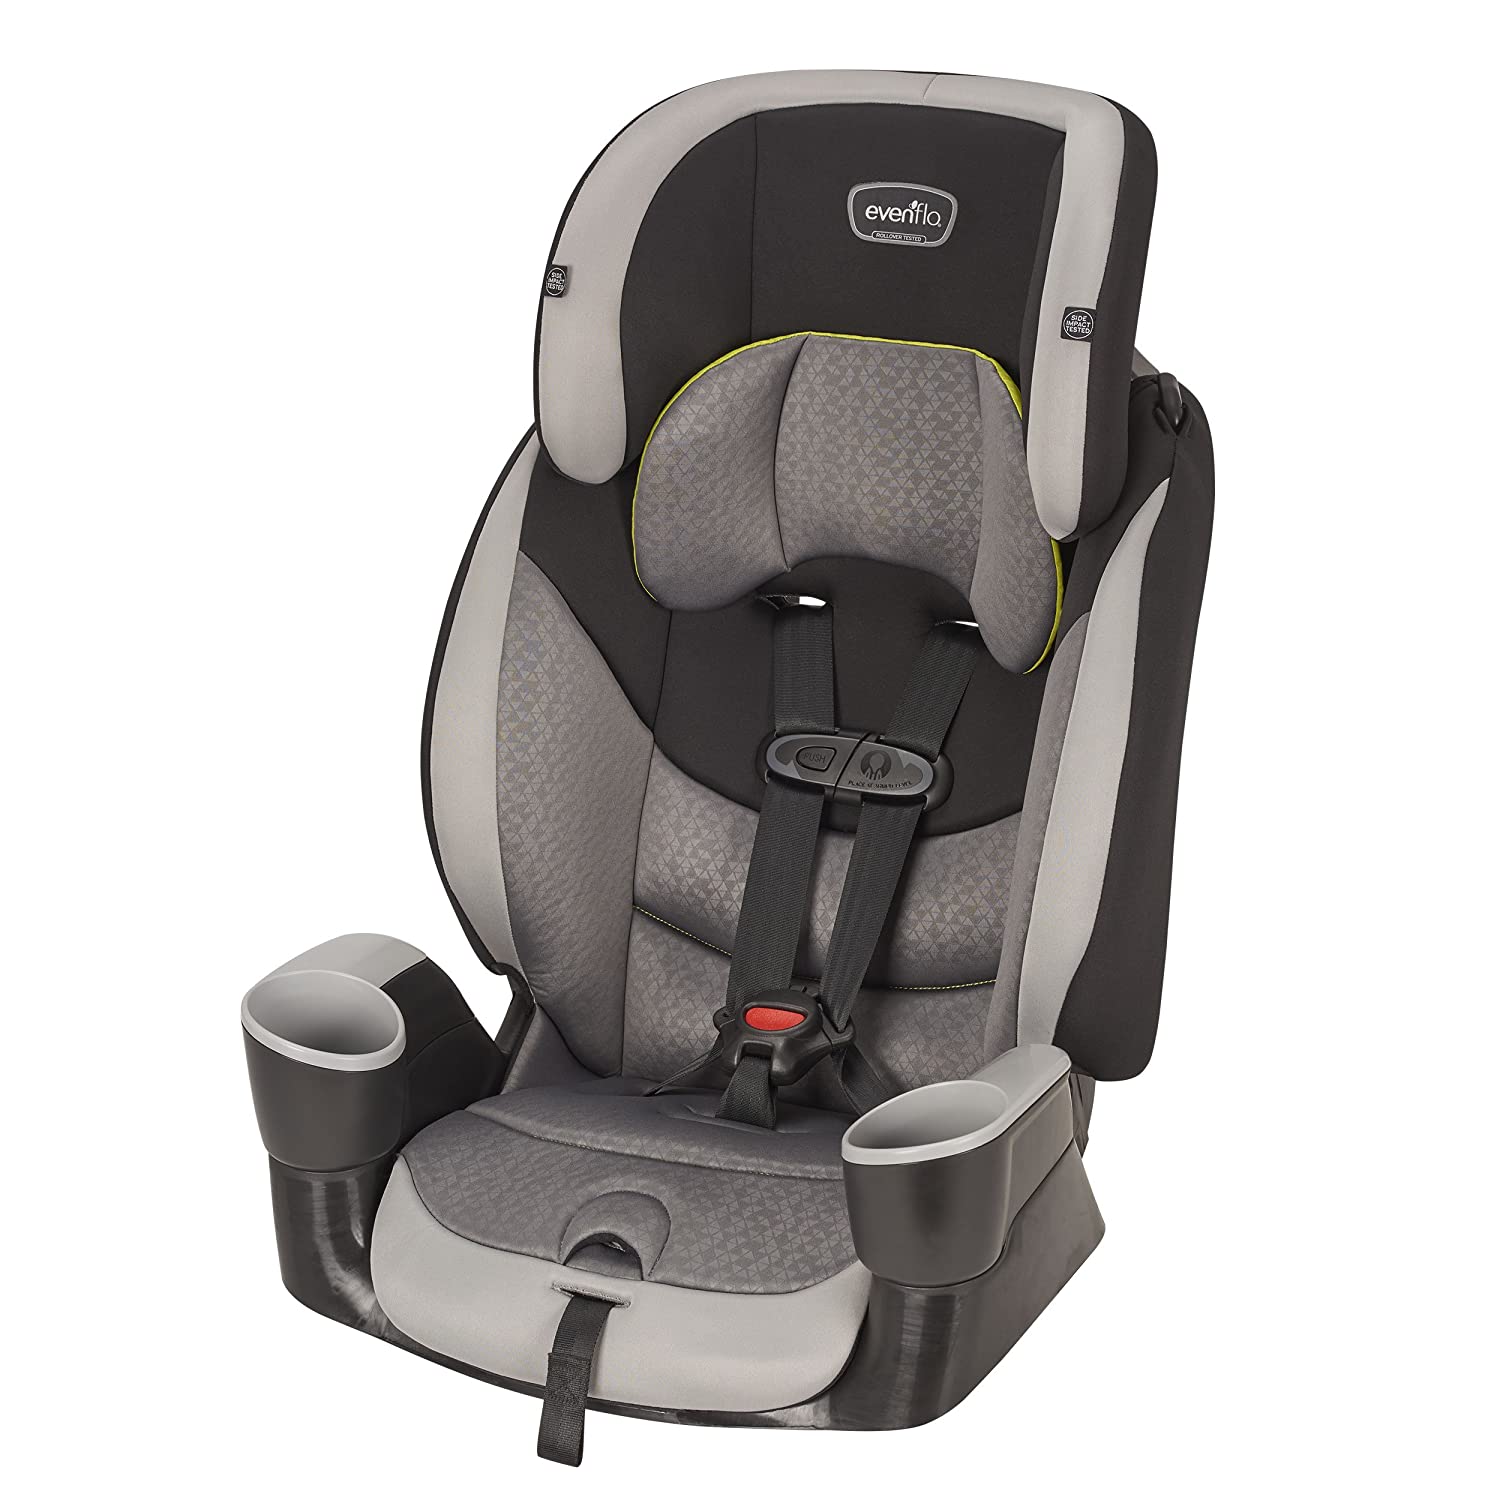 10 Best Booster Seats That Your Kids Would Love (Updated 2022)